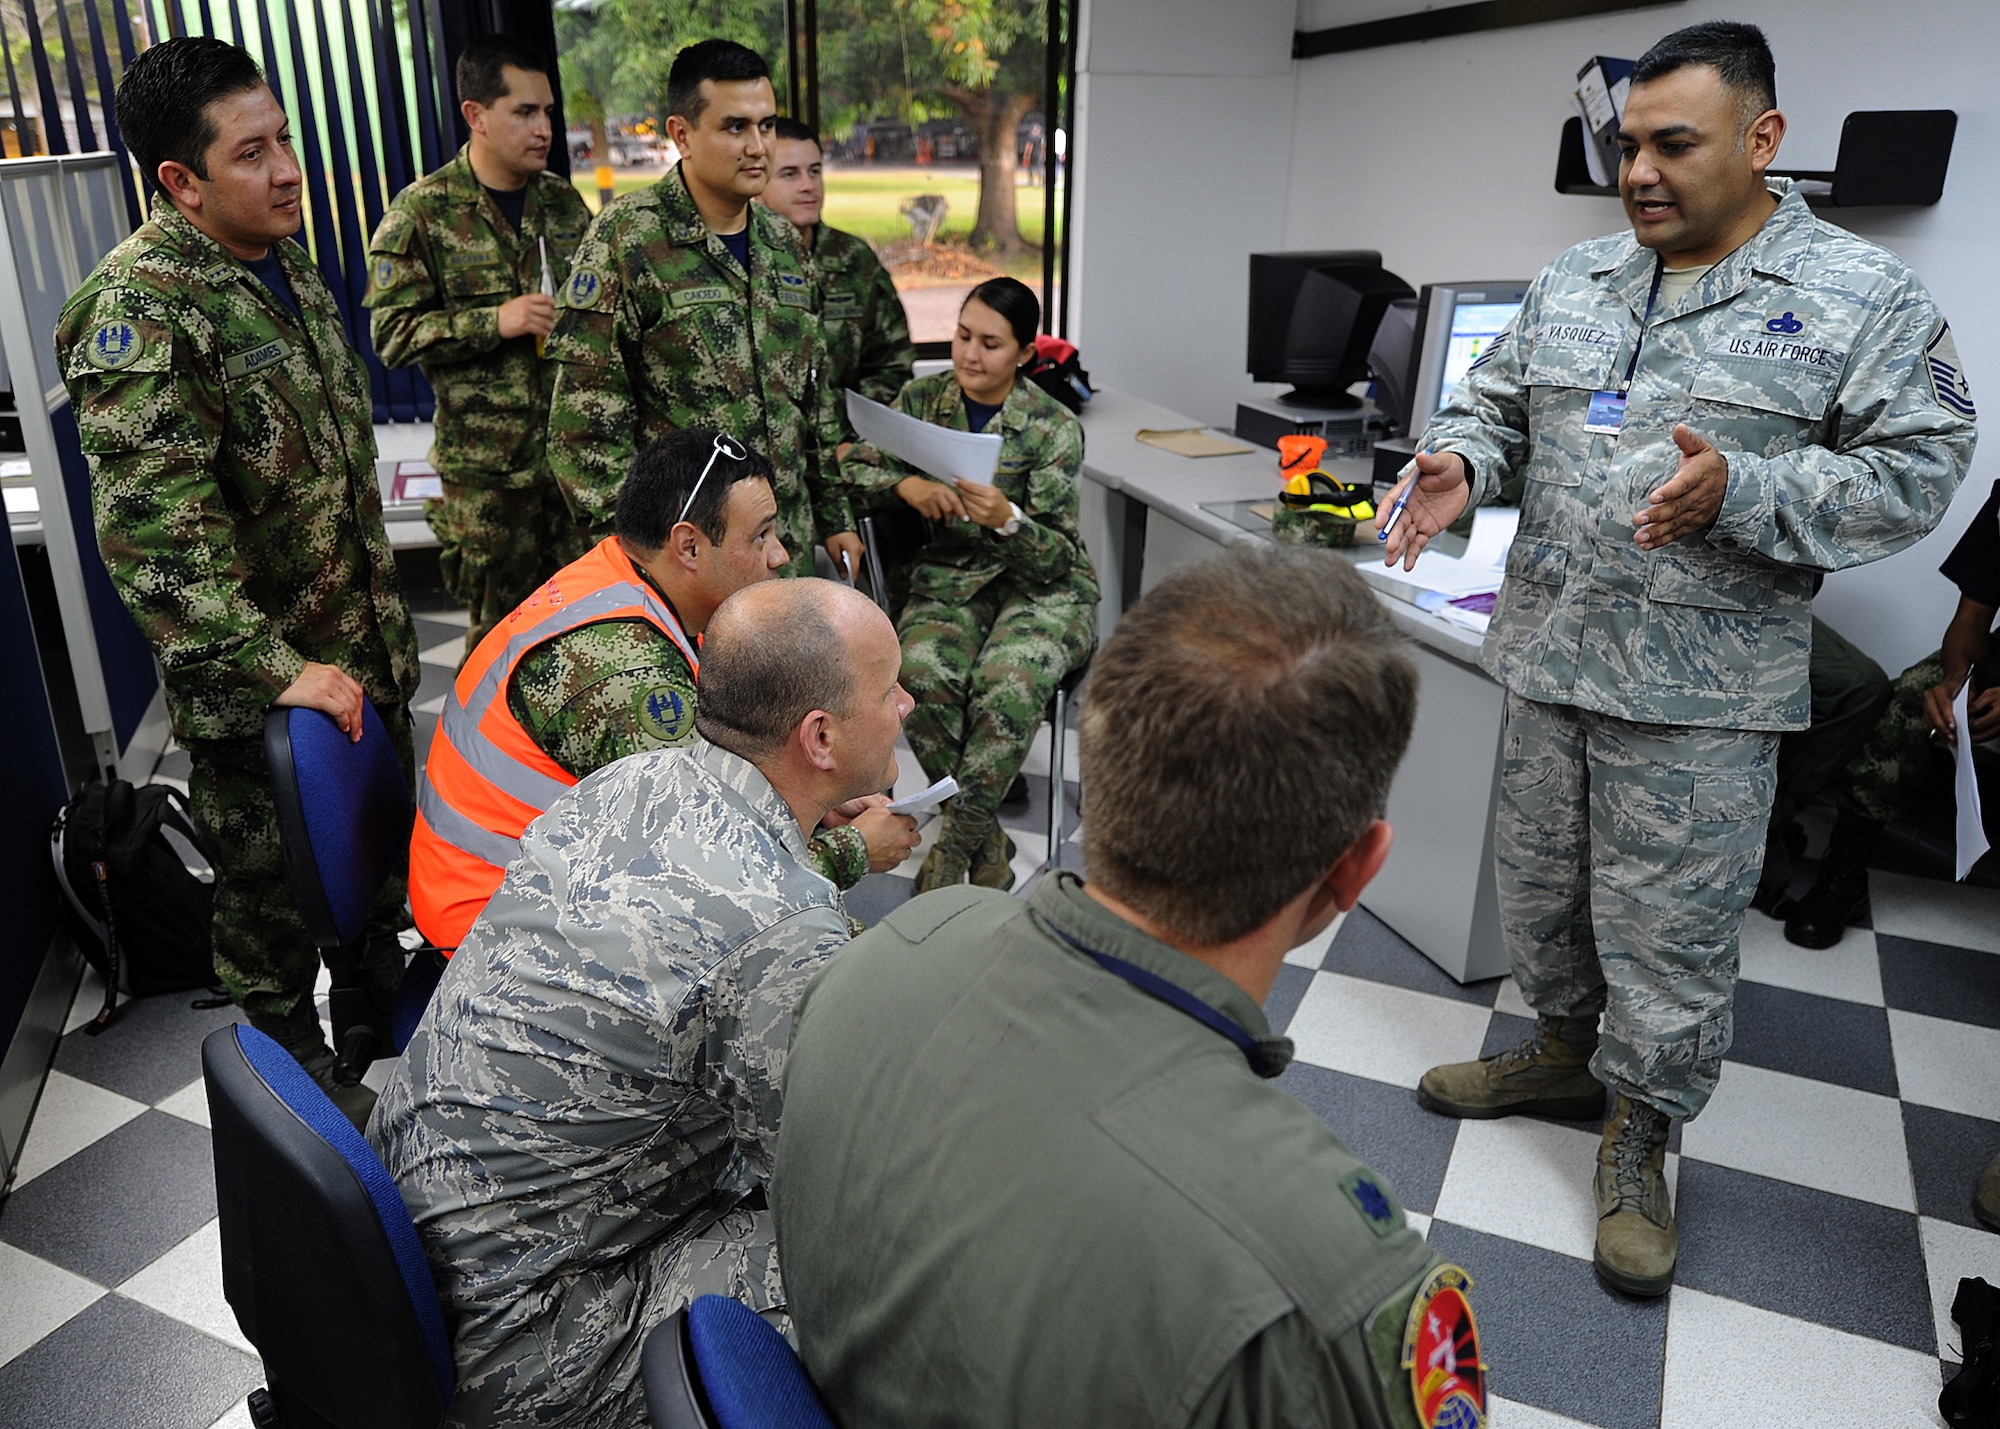 Master Sgt. Roberto Vasquez, 12th AF (AFSOUTH) heavy aircraft manager, shows the Colombian air force the proper way of providing a maintenance operations center briefing to senior leadership June 14, at Comando Aéreo de Combate No. 1 base, Palanquero, Colombia, as part of a month-long Air Mobility Command Building Partner Capacity mission. (U.S. Air Force photo by Tech. Sgt. Lesley Waters)